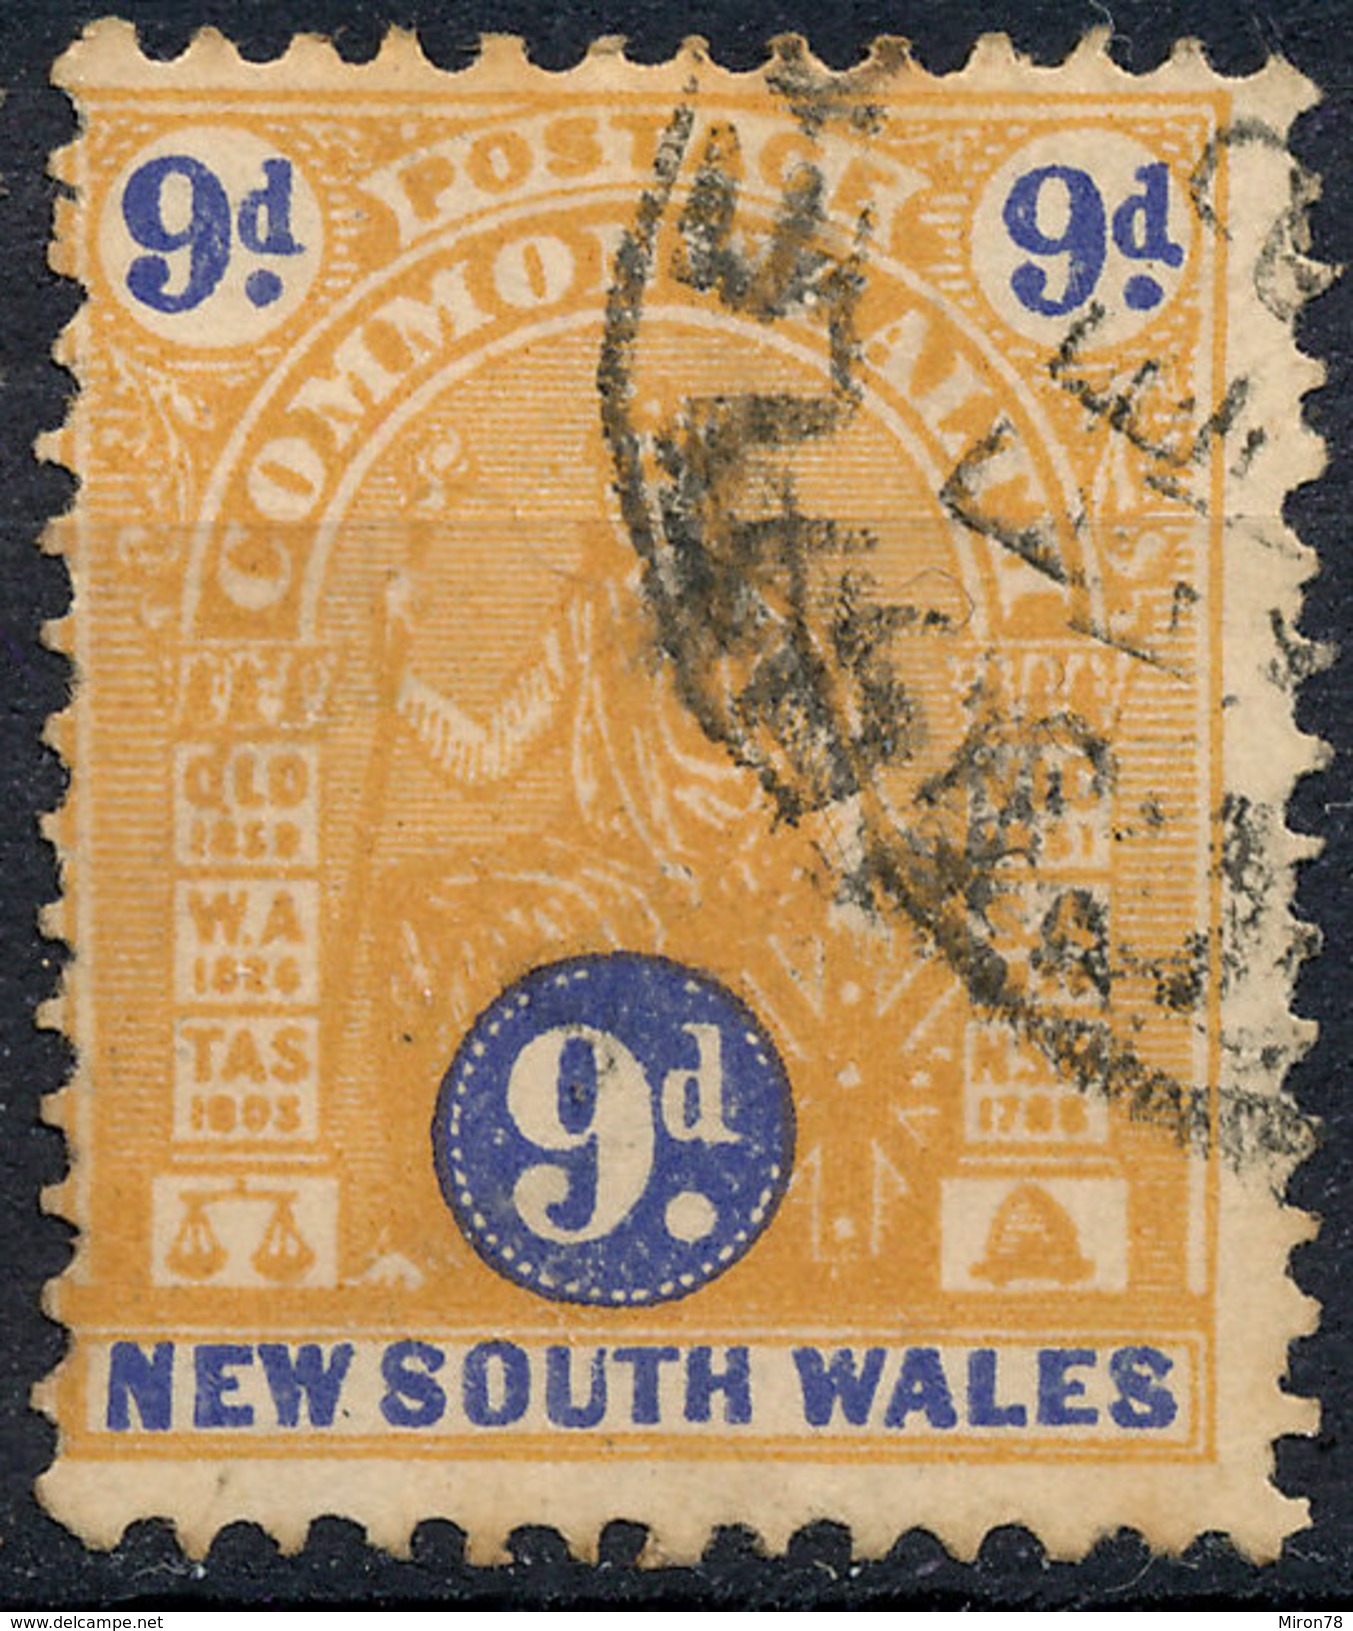 Stamp   New South Wales   Used  9p Used Lot#76 - Gebraucht